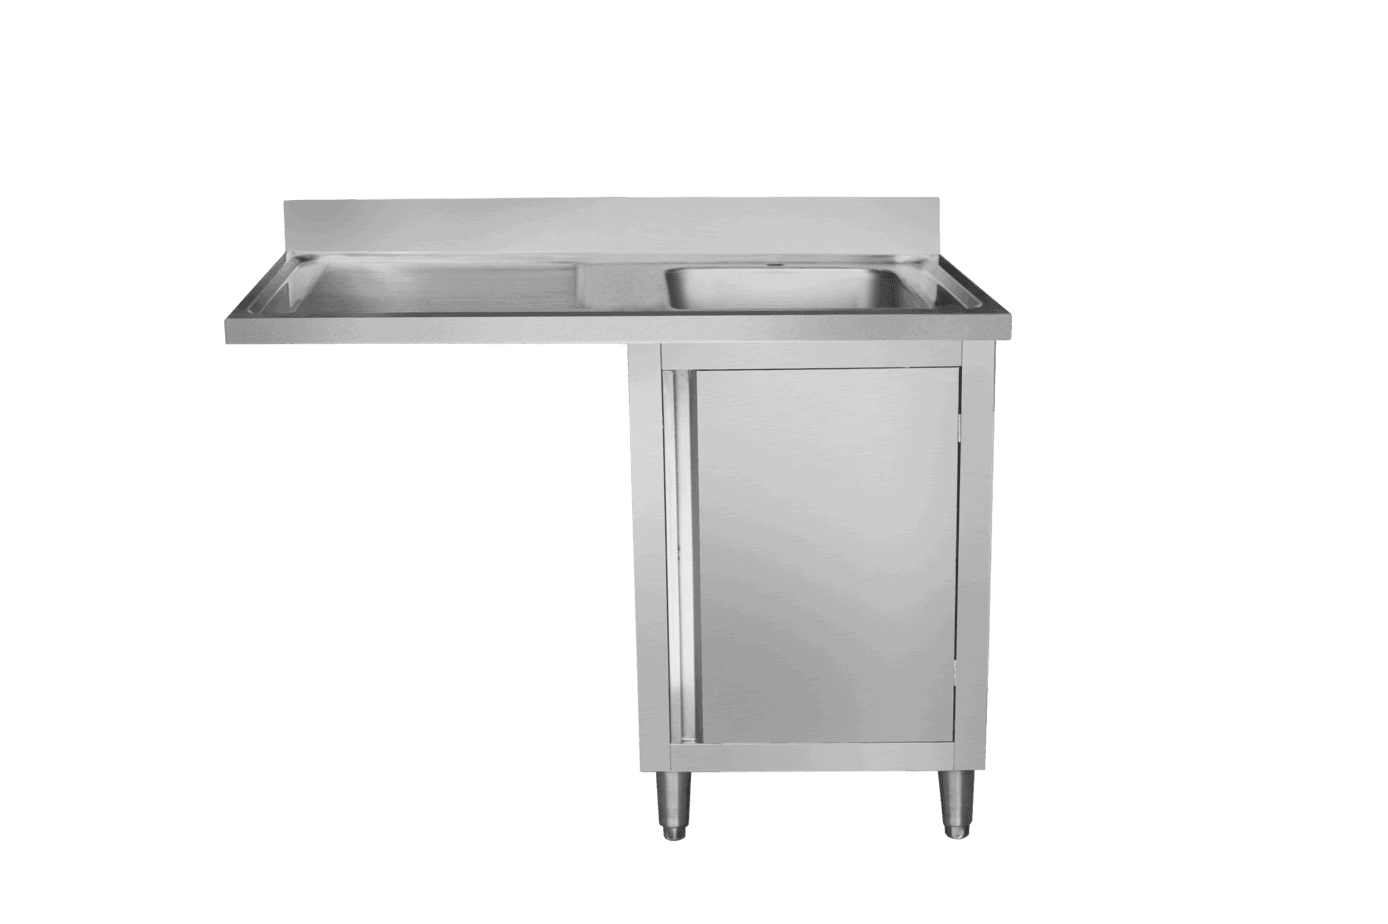 Stainless Steel Catering Sink Cupboard 1200mm - commercial catering sinks